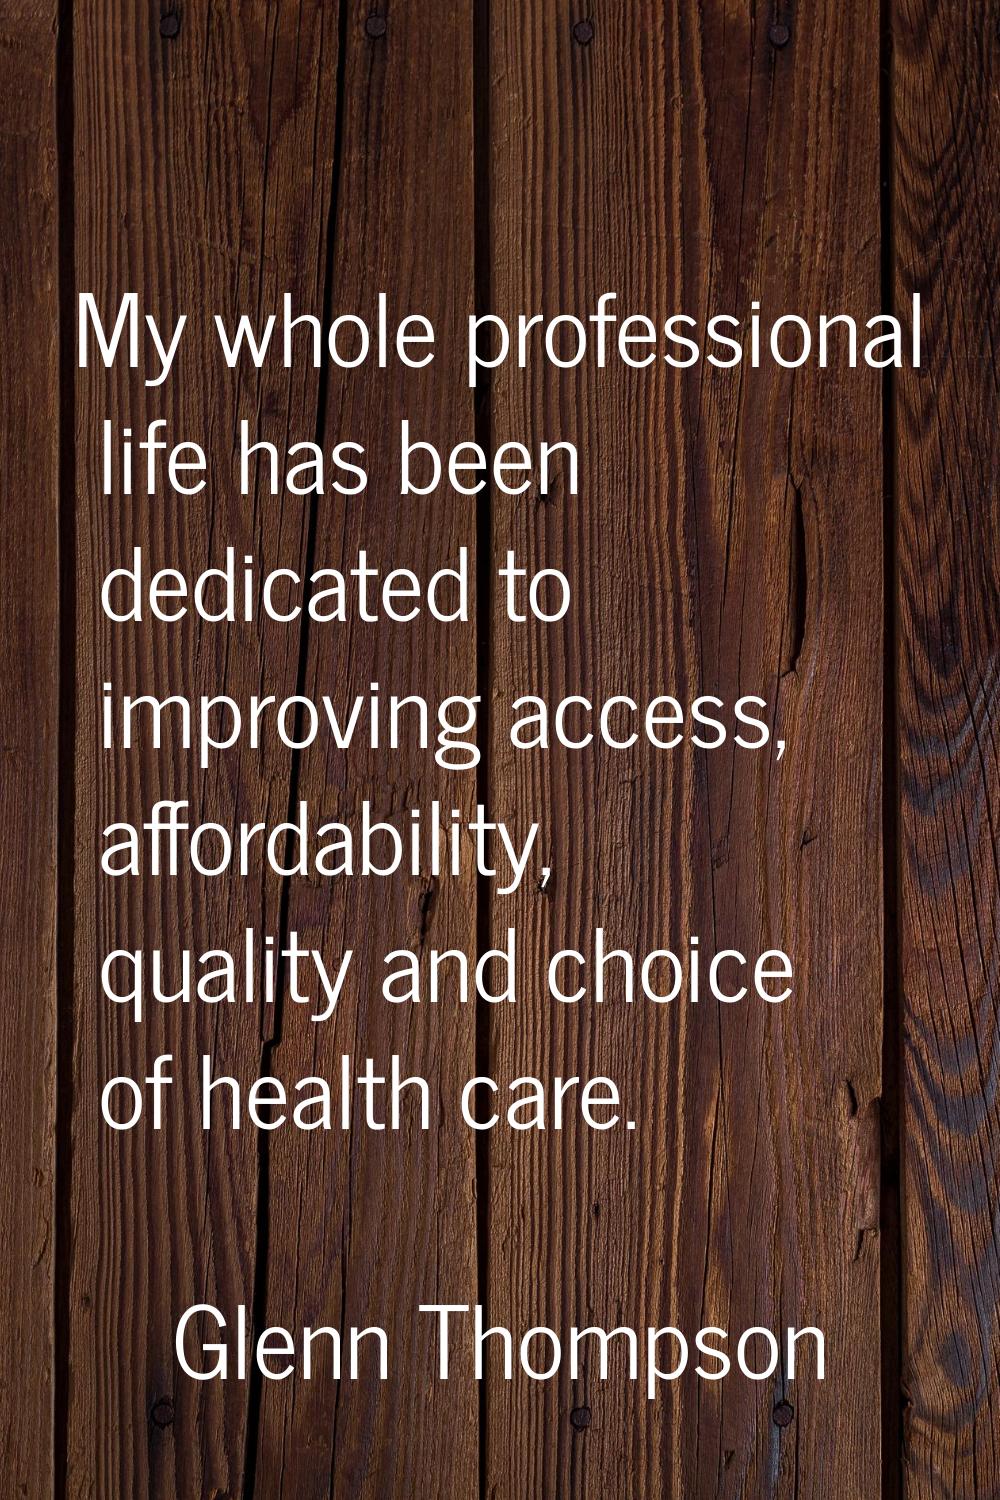 My whole professional life has been dedicated to improving access, affordability, quality and choic